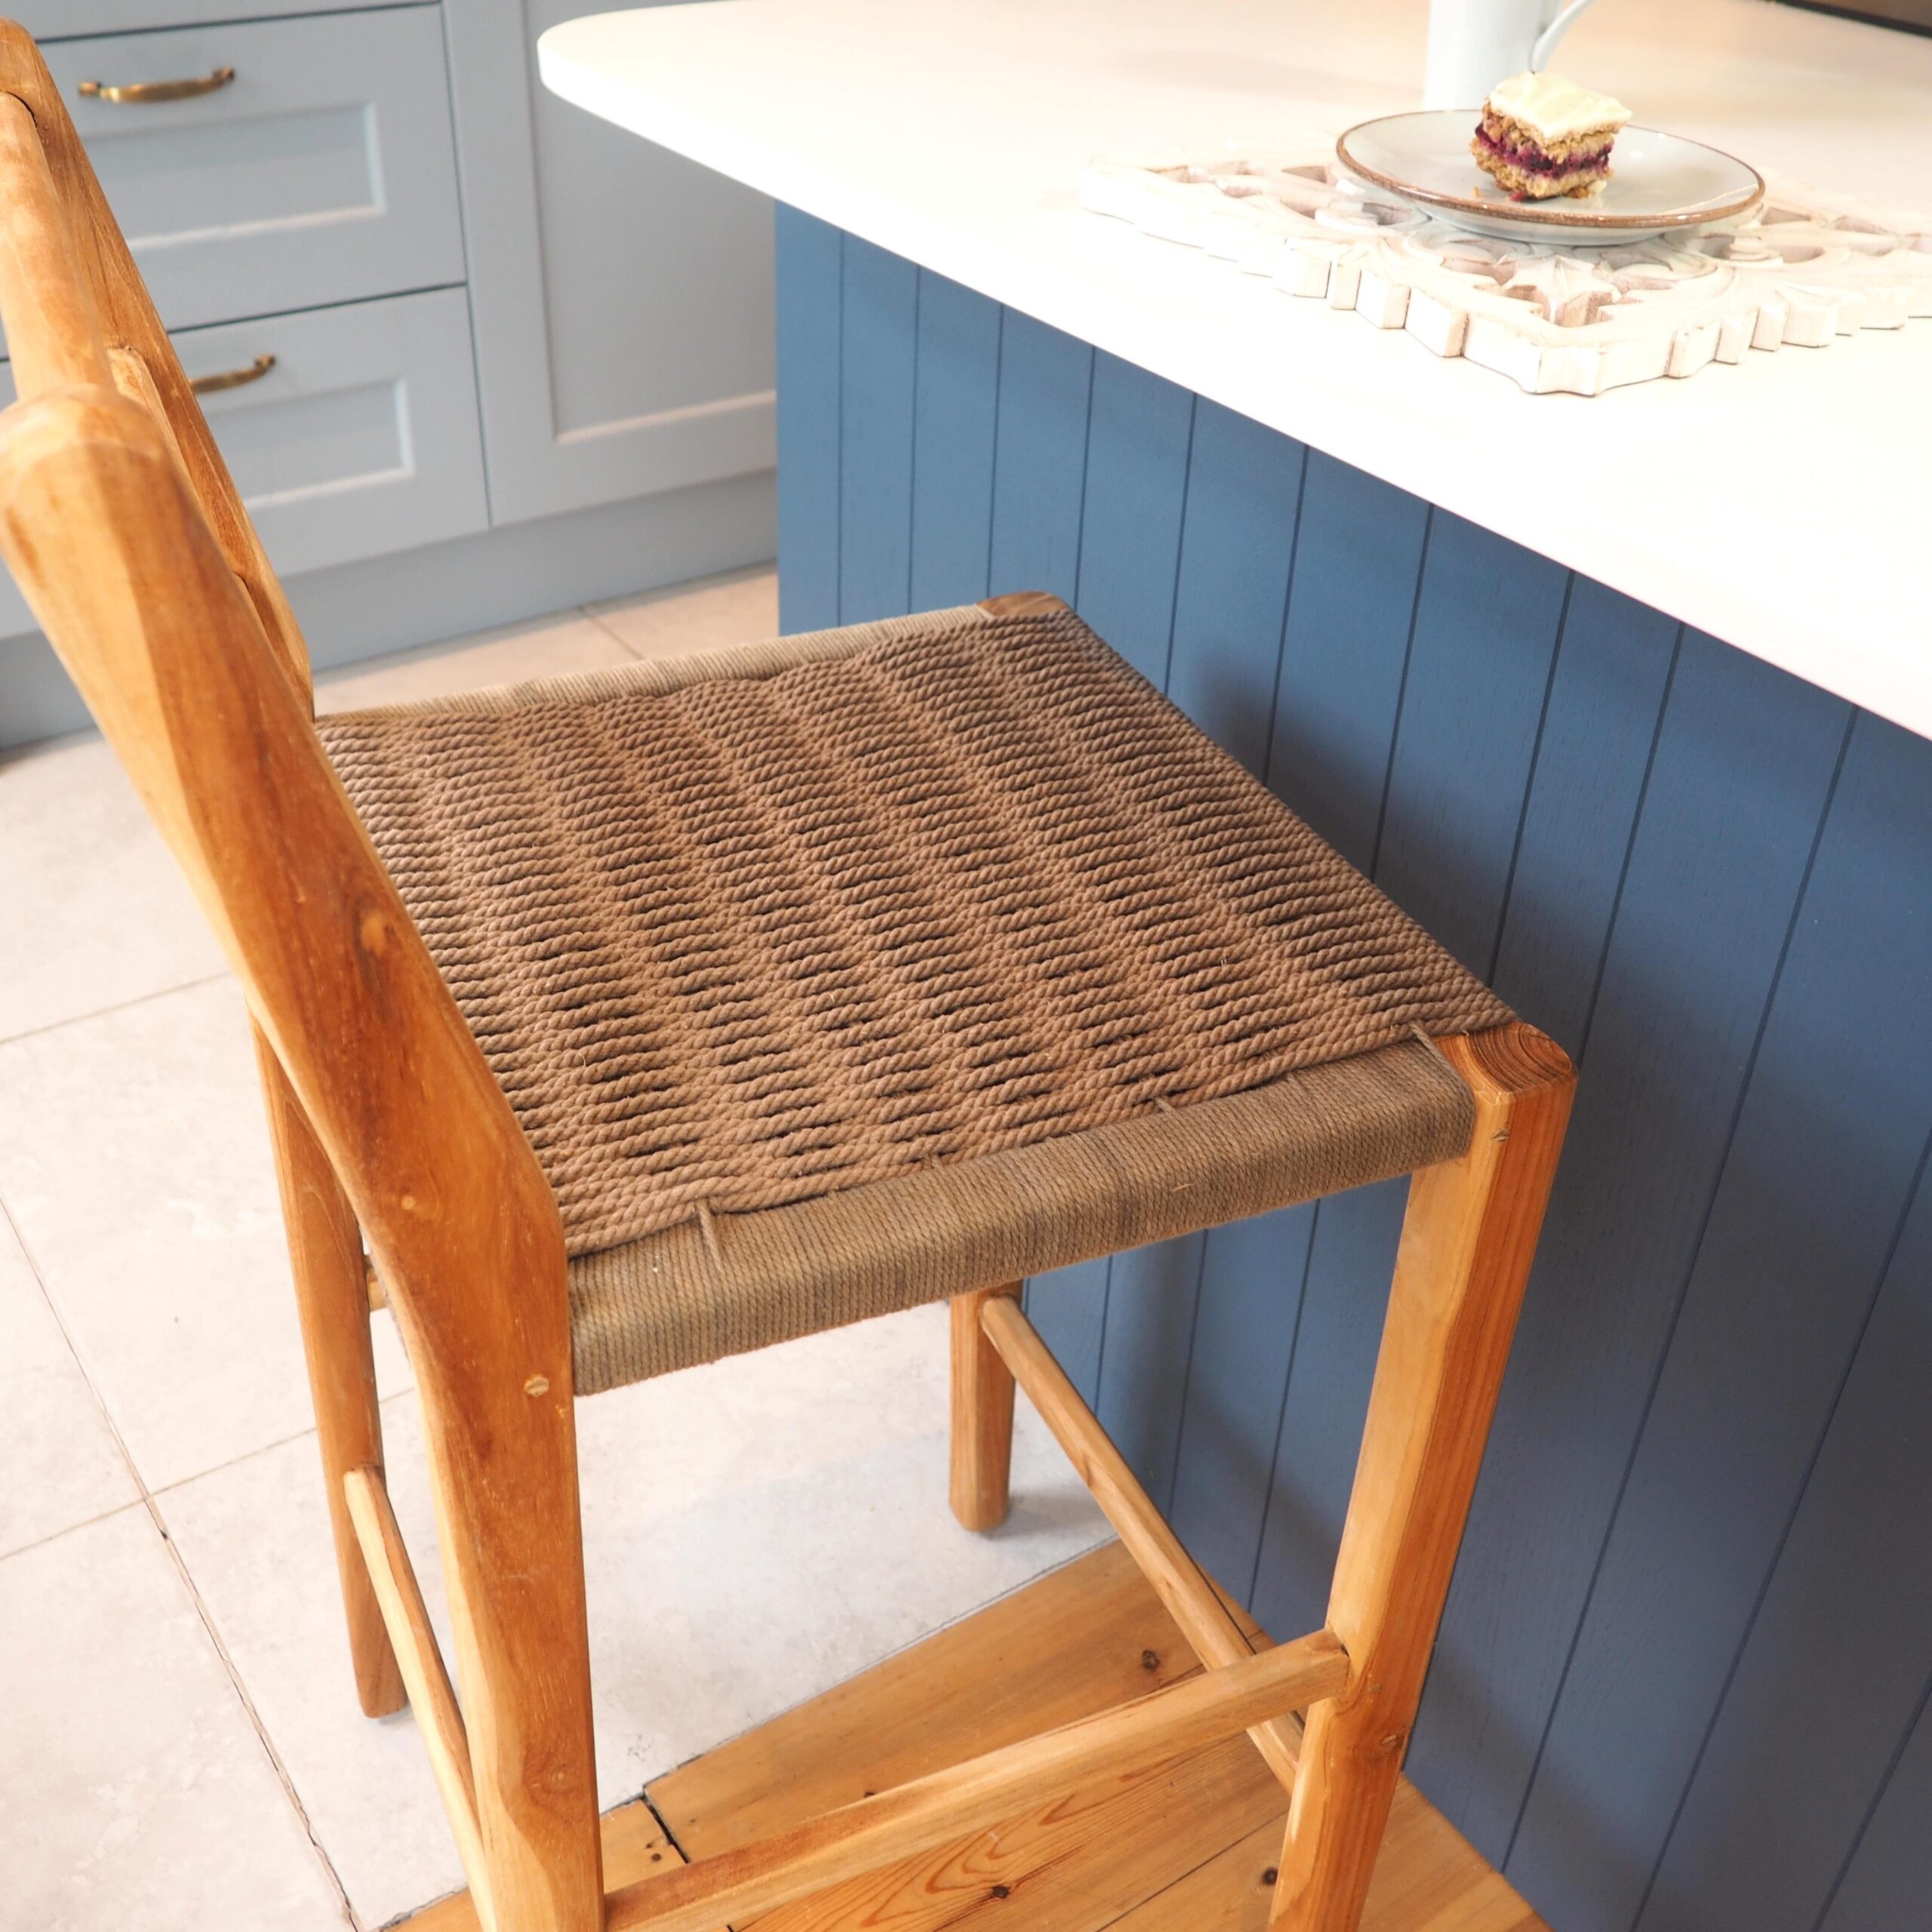 Close up of wicker kitchen stool